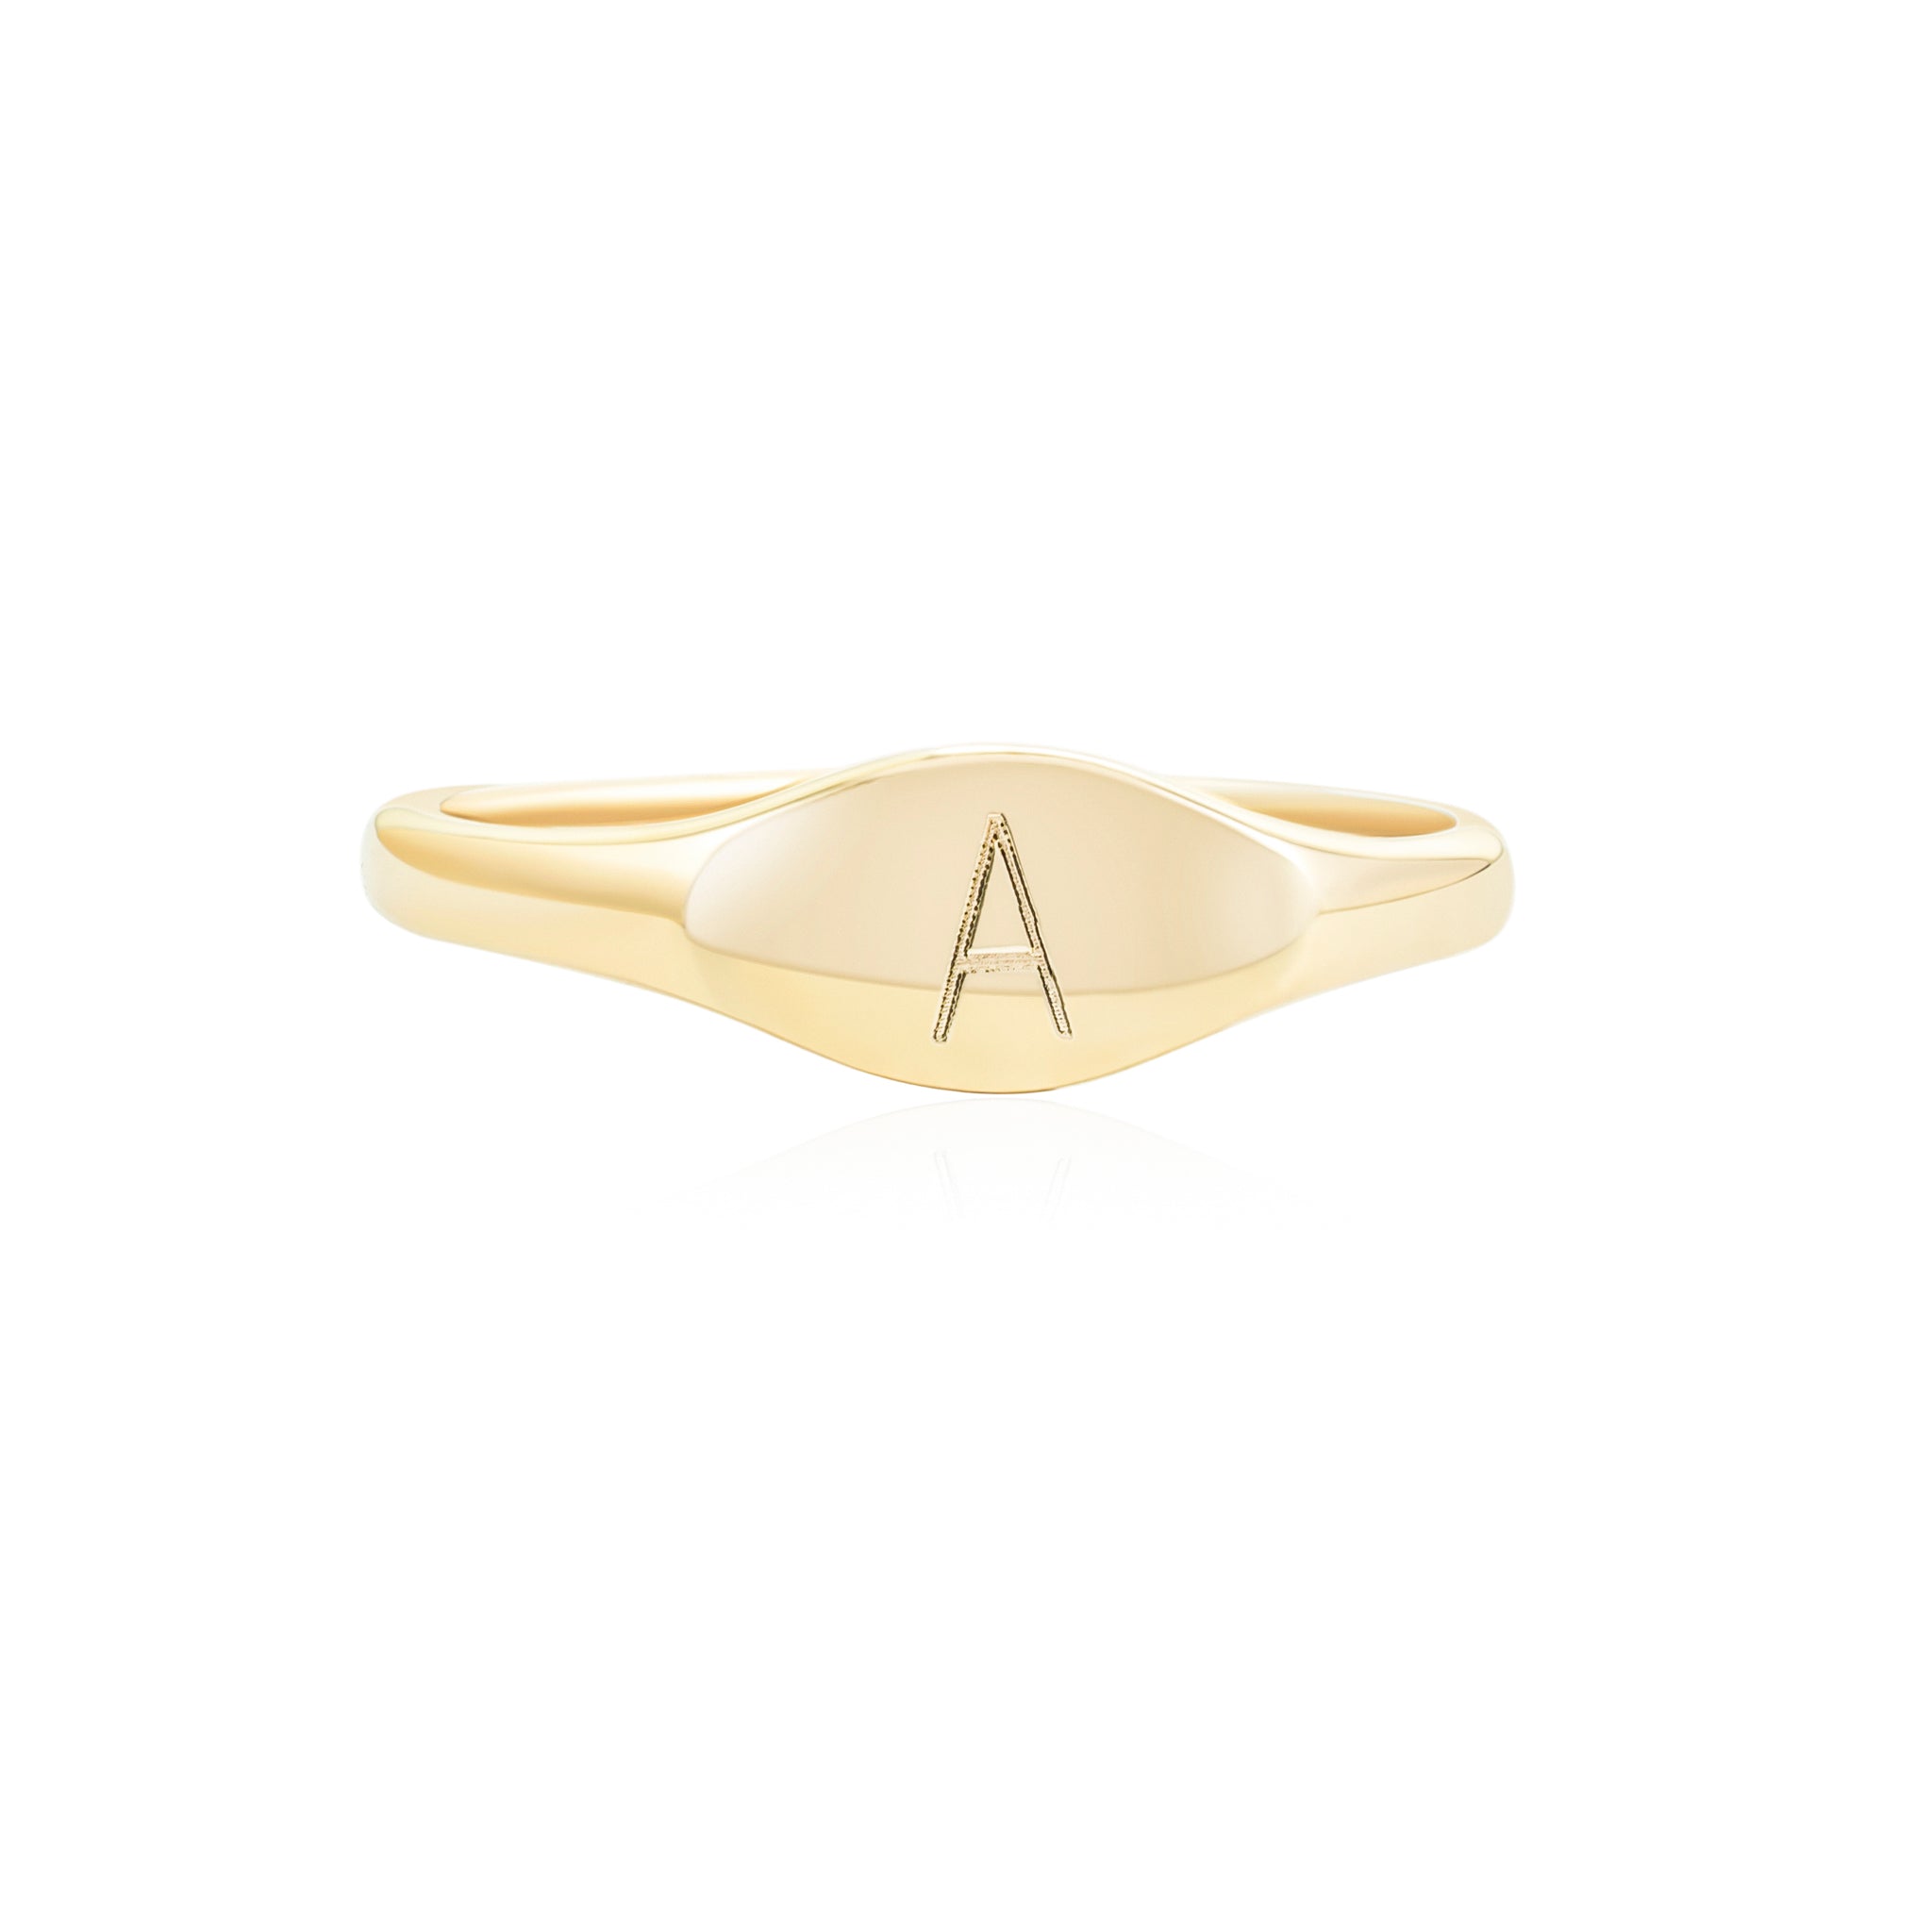  Handmade 9K Solid Gold Personalized Signet Ring, 1-3 Letters  Monogram and/or Black Diamond or Zirconl. Sizes US 2.25-11 : Handmade  Products